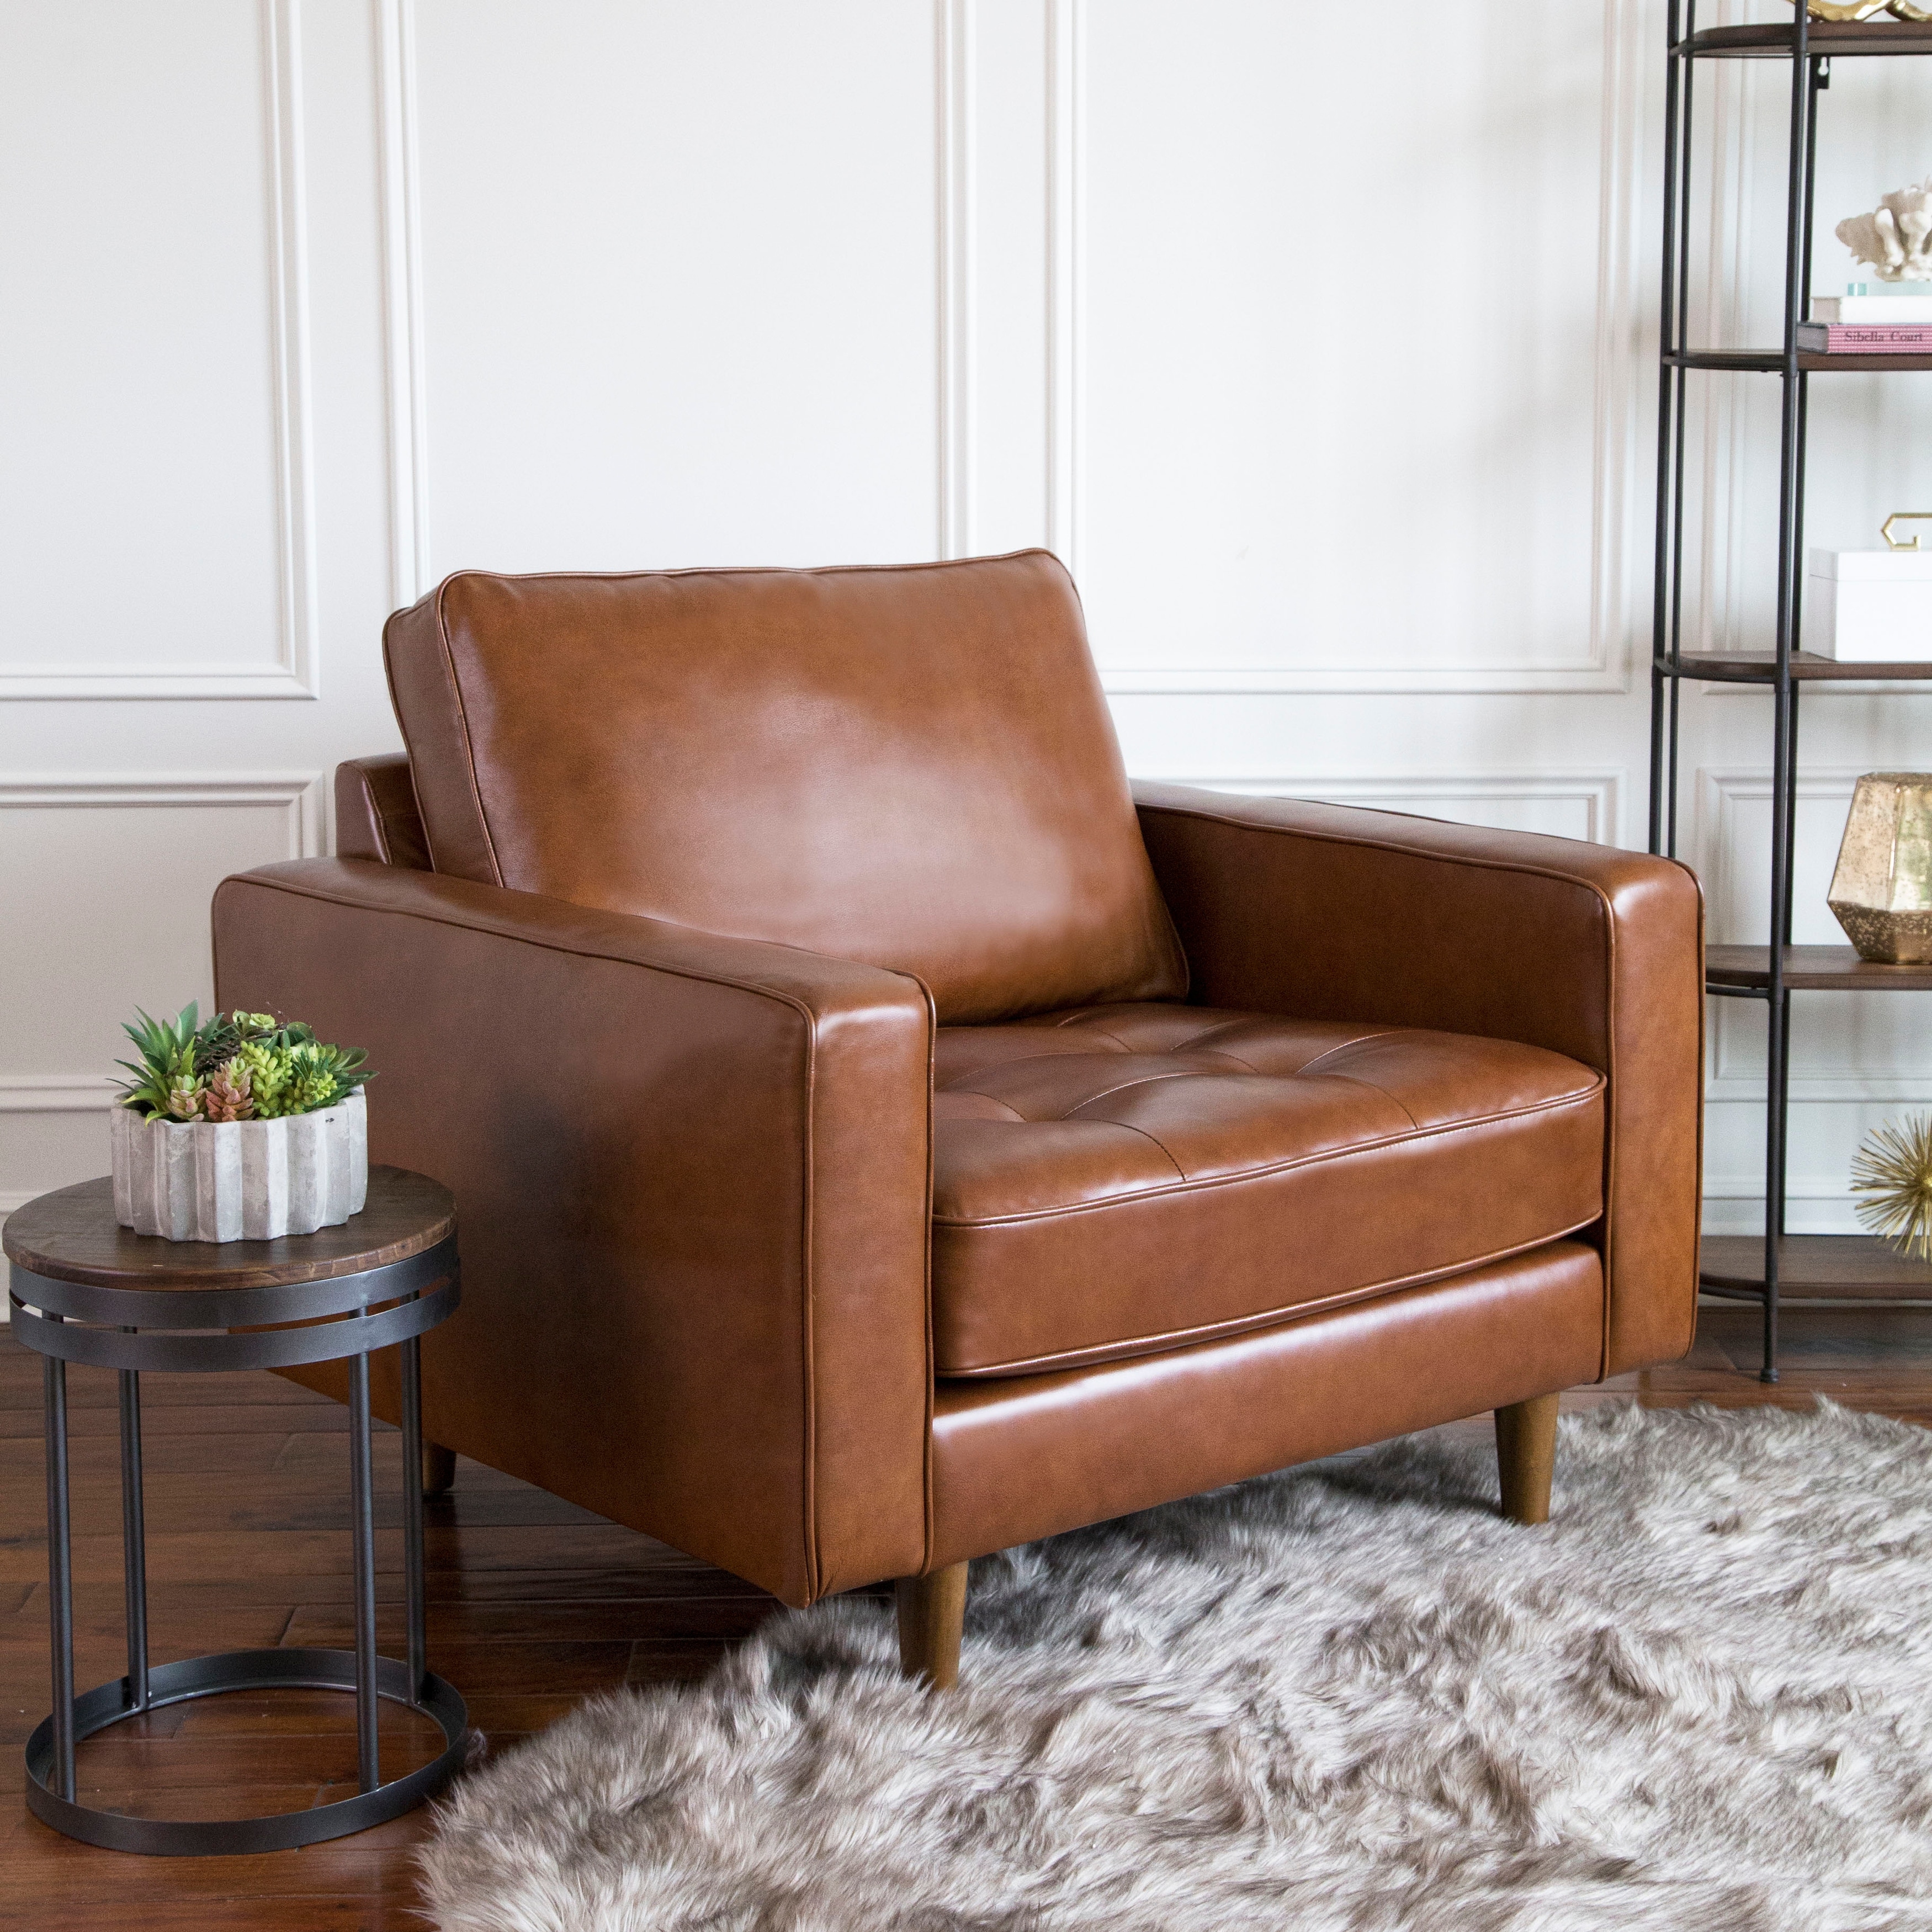 Mid Century Modern Leather Armchair Hot Sale, 5% OFF  www